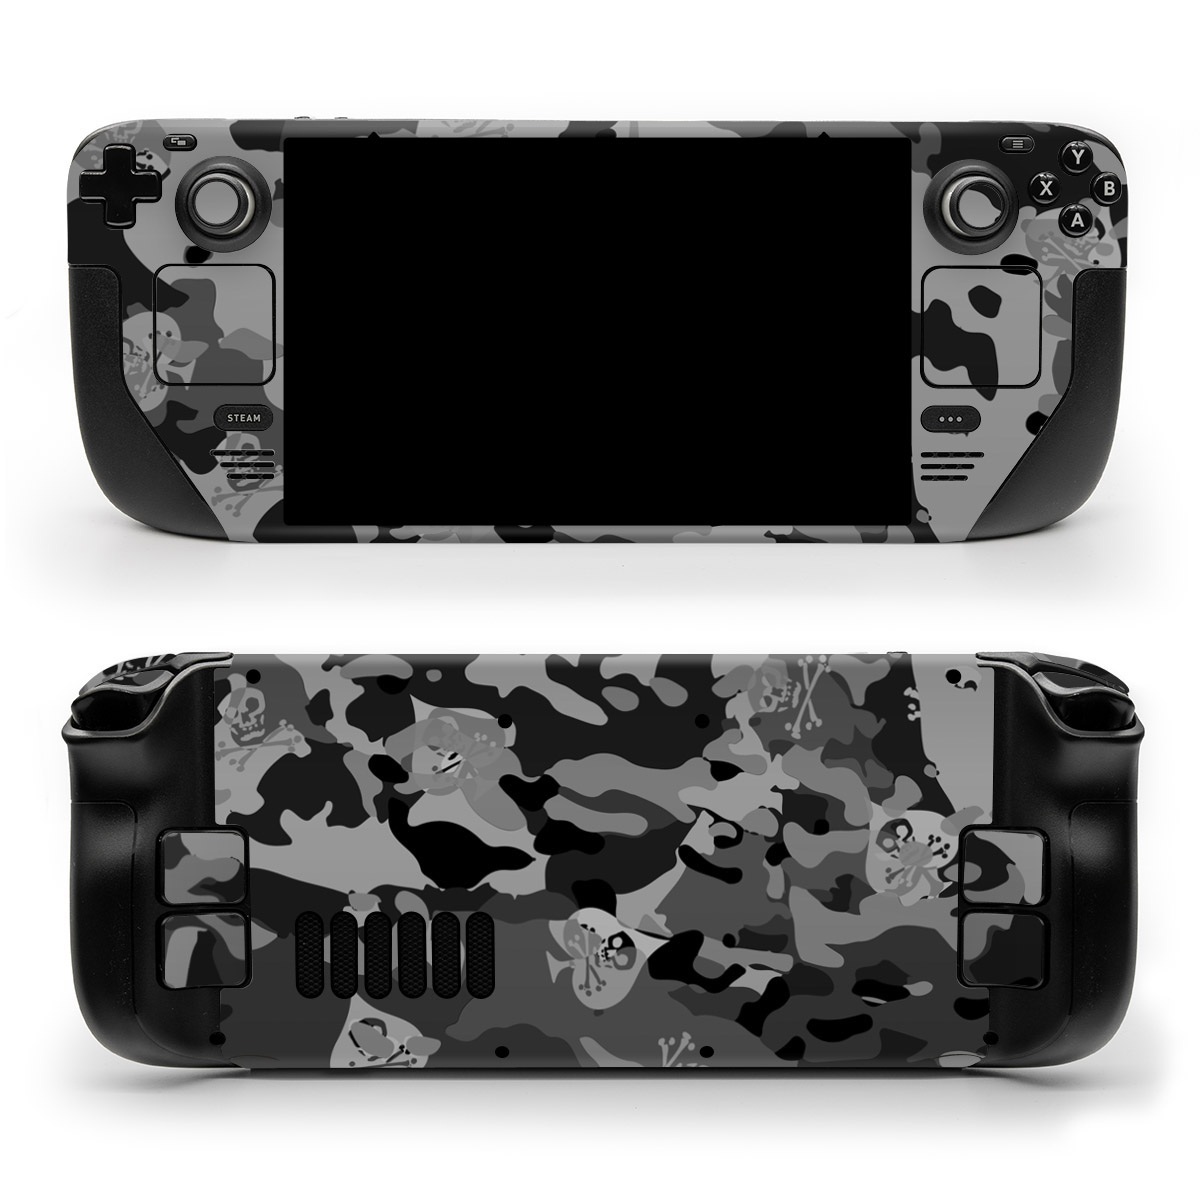 Valve Steam Deck Skin design of Military camouflage, Pattern, Design, Camouflage, Illustration, Uniform, Black-and-white, Wallpaper, Art, with black, gray colors